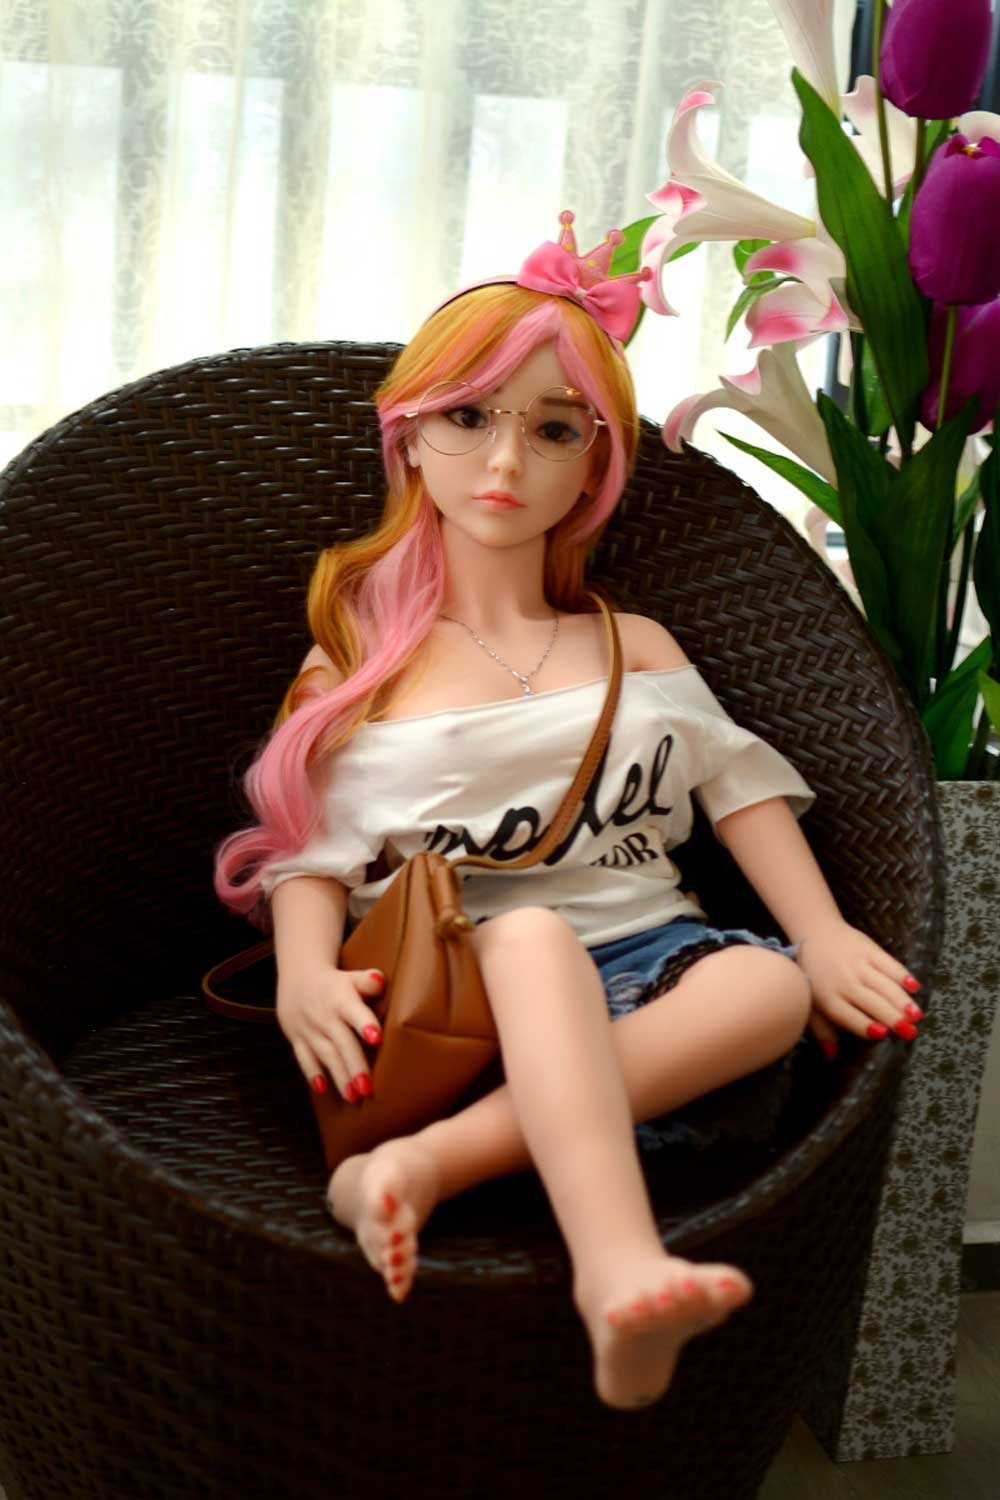 A mini sex doll with glasses sitting on a chair